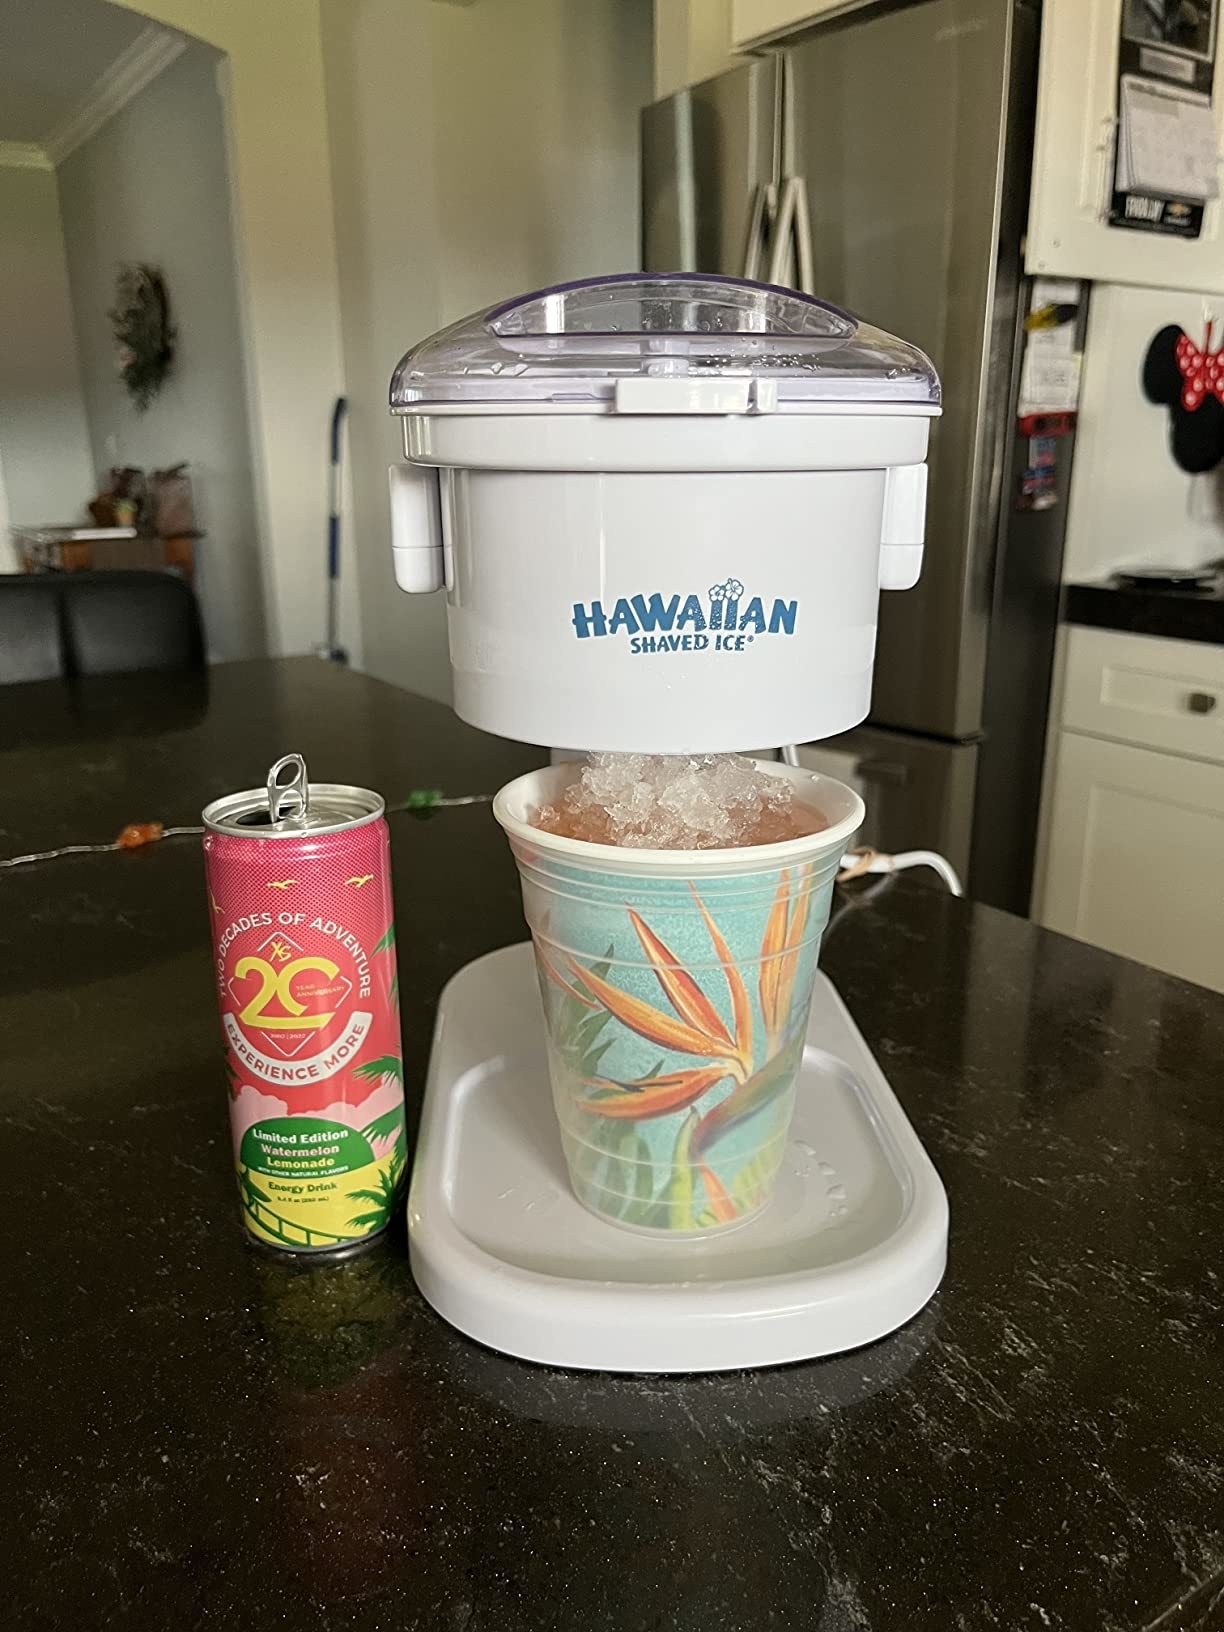 Hawaiian Shaved Ice machine with a can of juice and a cup filled with shaved ice on a kitchen counter